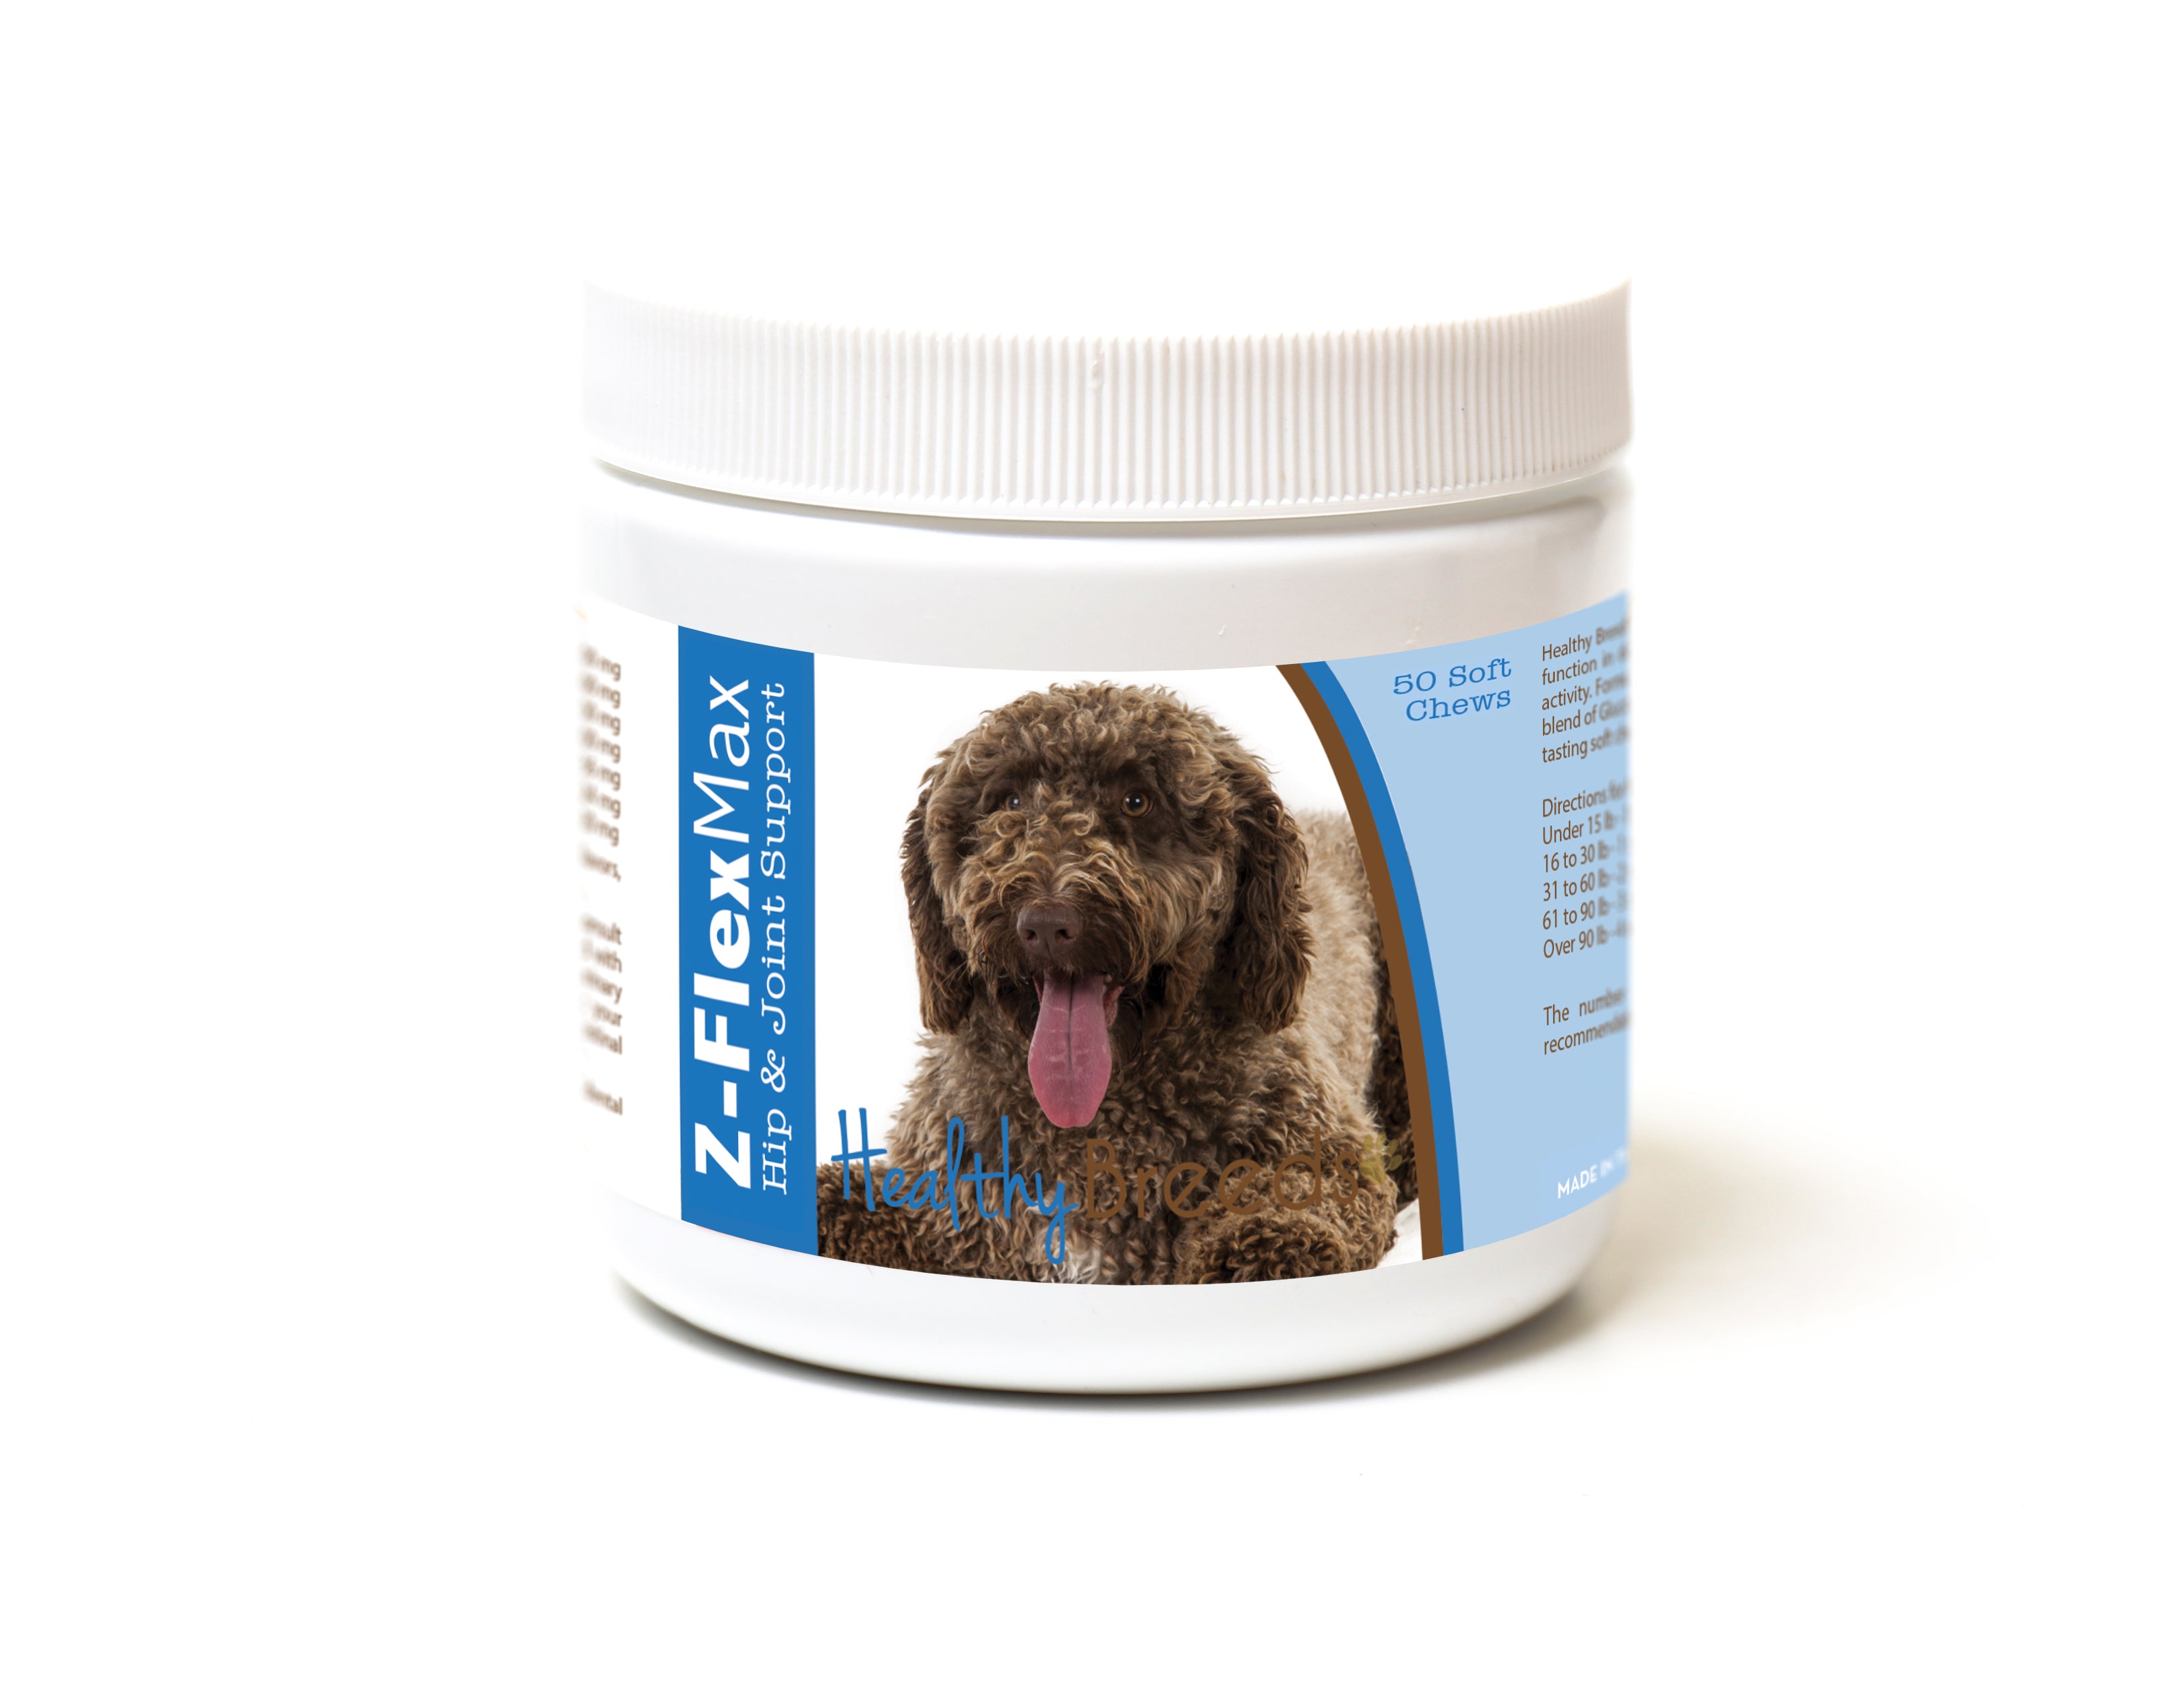 Spanish Water Dog Z-Flex Max Hip and Joint Soft Chews 50 Count